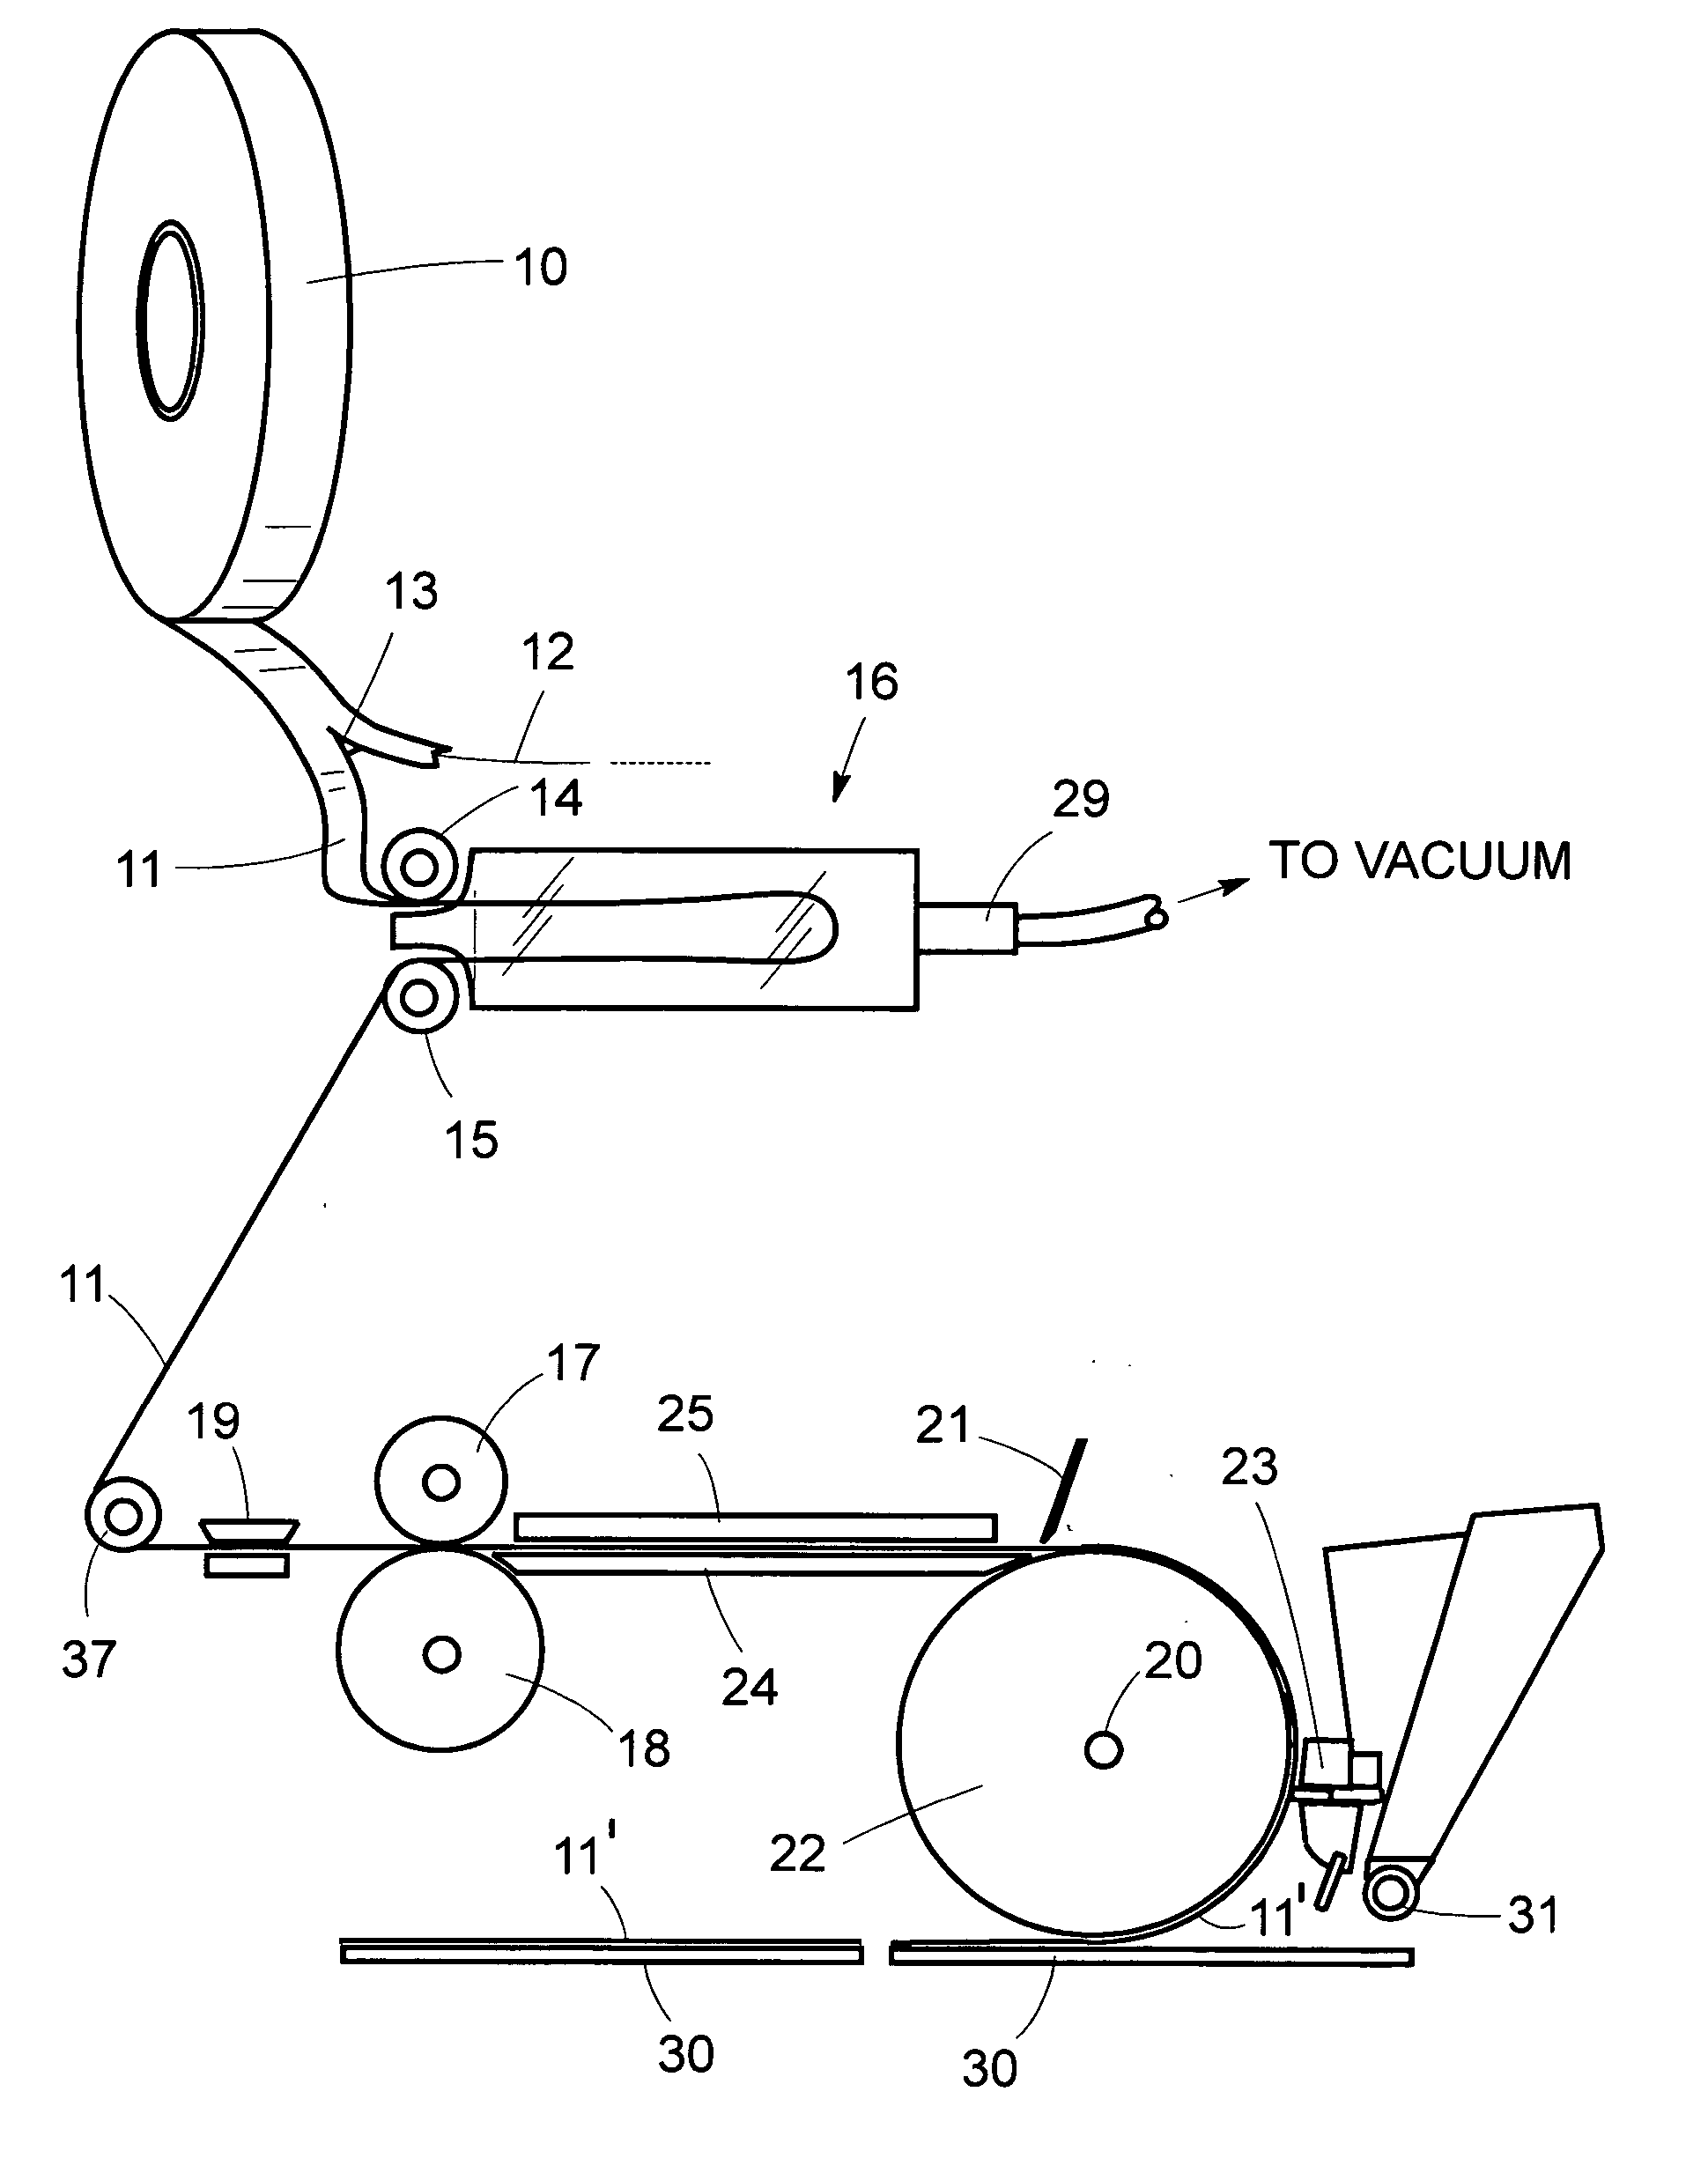 Apparatus and process for placement of sealing adhesives on containers